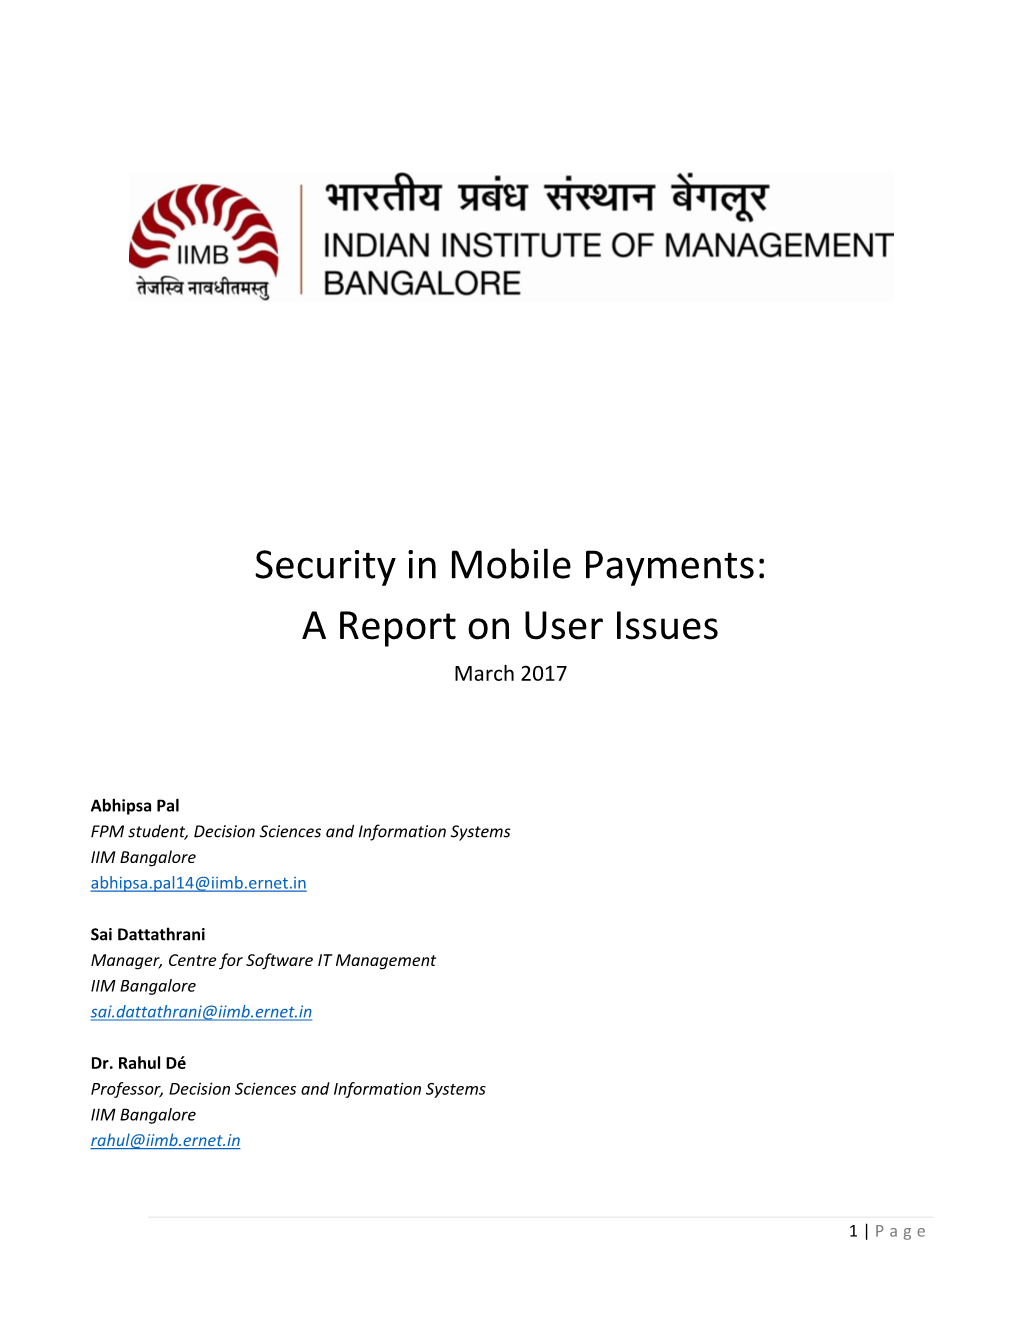 Security in Mobile Payments: a Report on User Issues March 2017